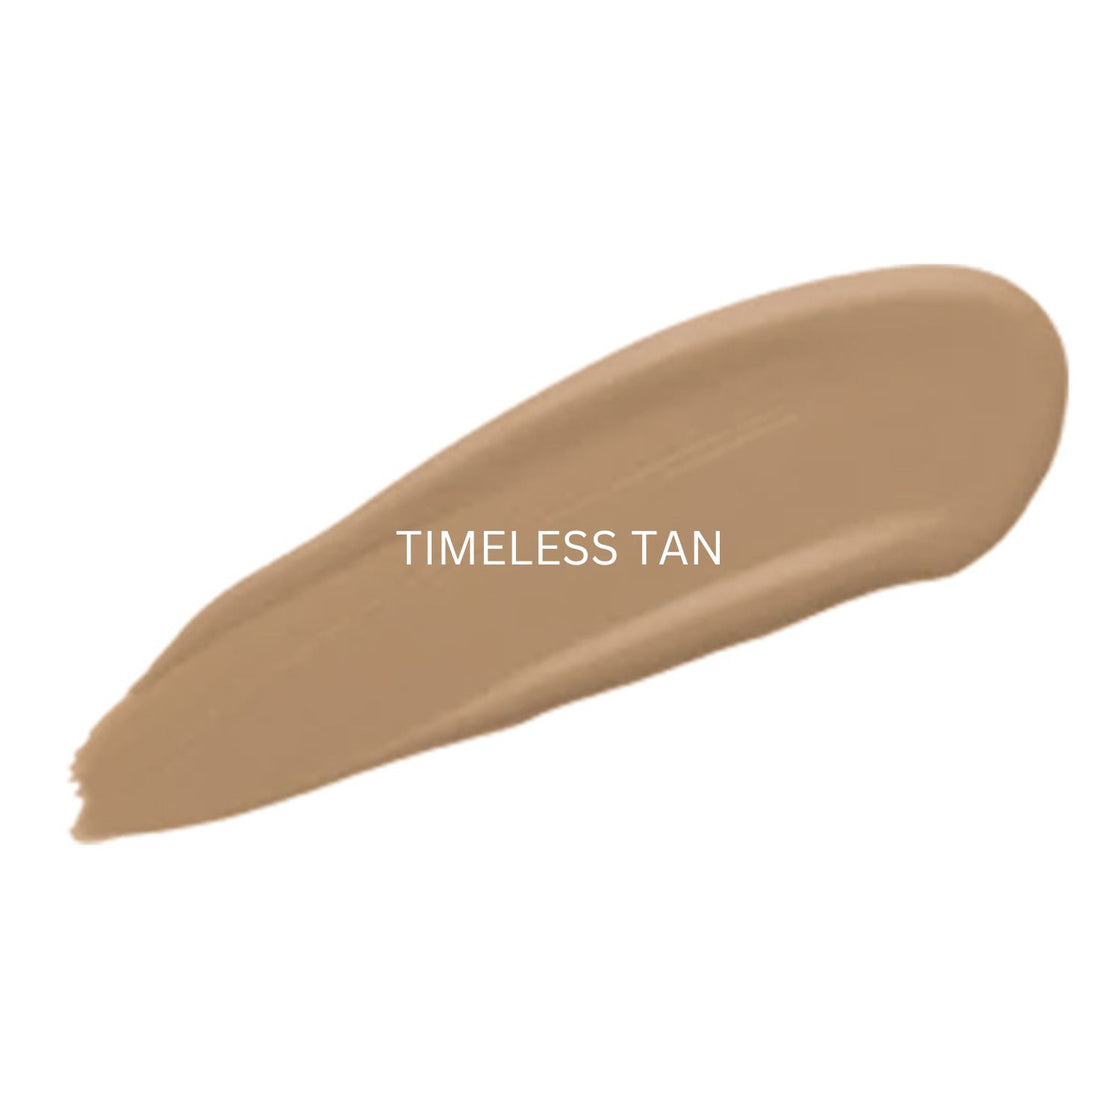 Paul Penders Hand Made Moisture Cream Foundation For A Natural Cover - Timeless Tan 30g